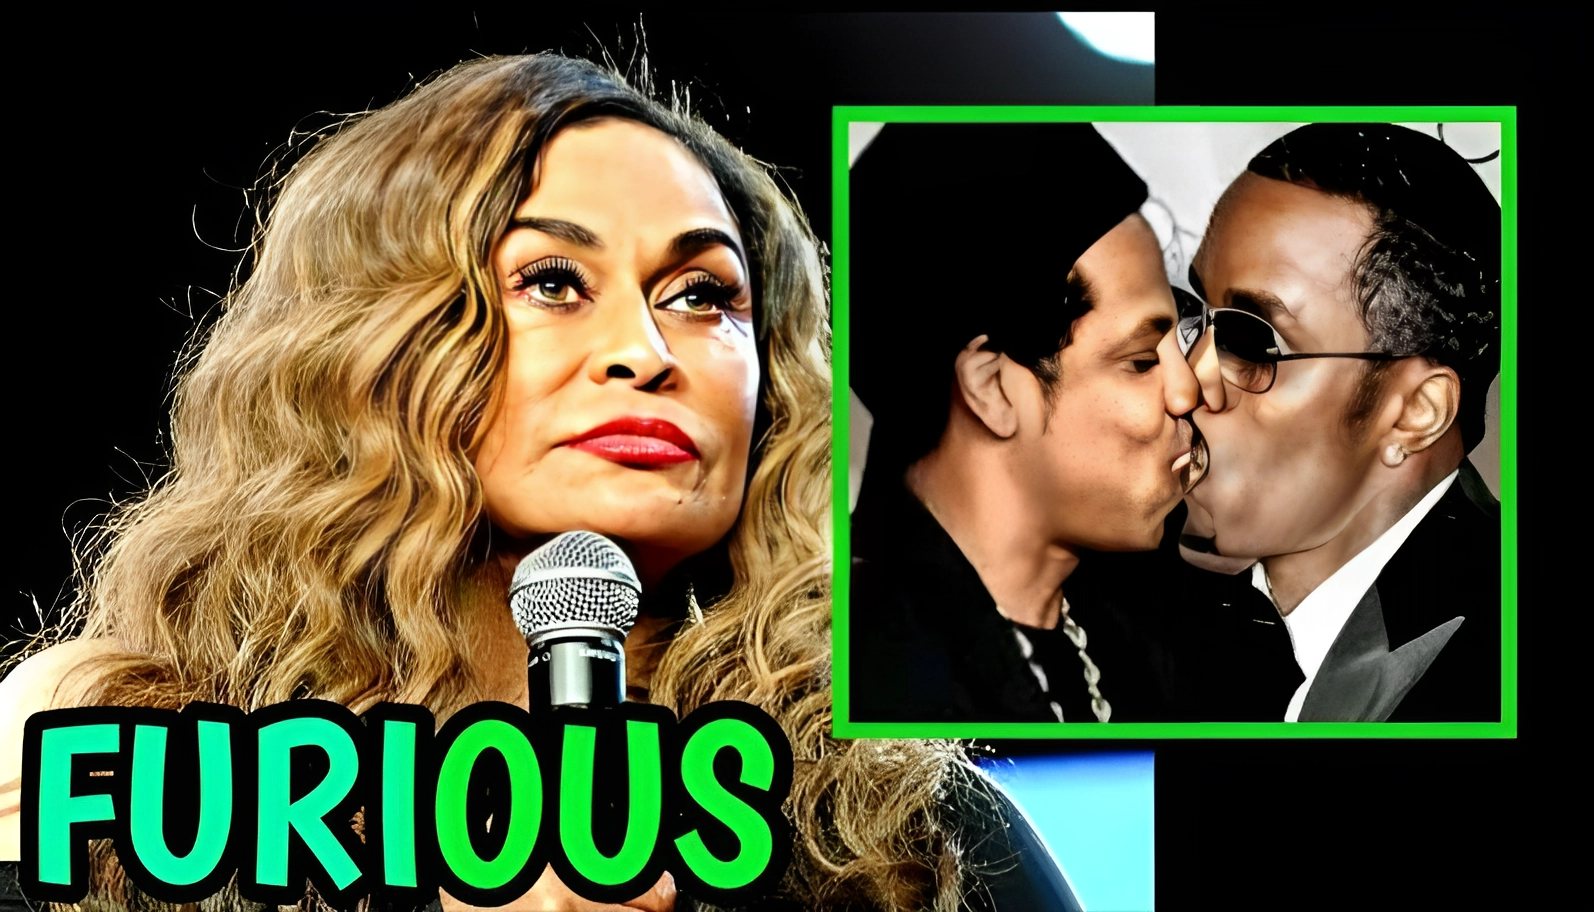 Tina Knowles Angrily VOWS Jay-Z Will Suffer After He Disgrace Beyonce By Having an Affair With Diddy